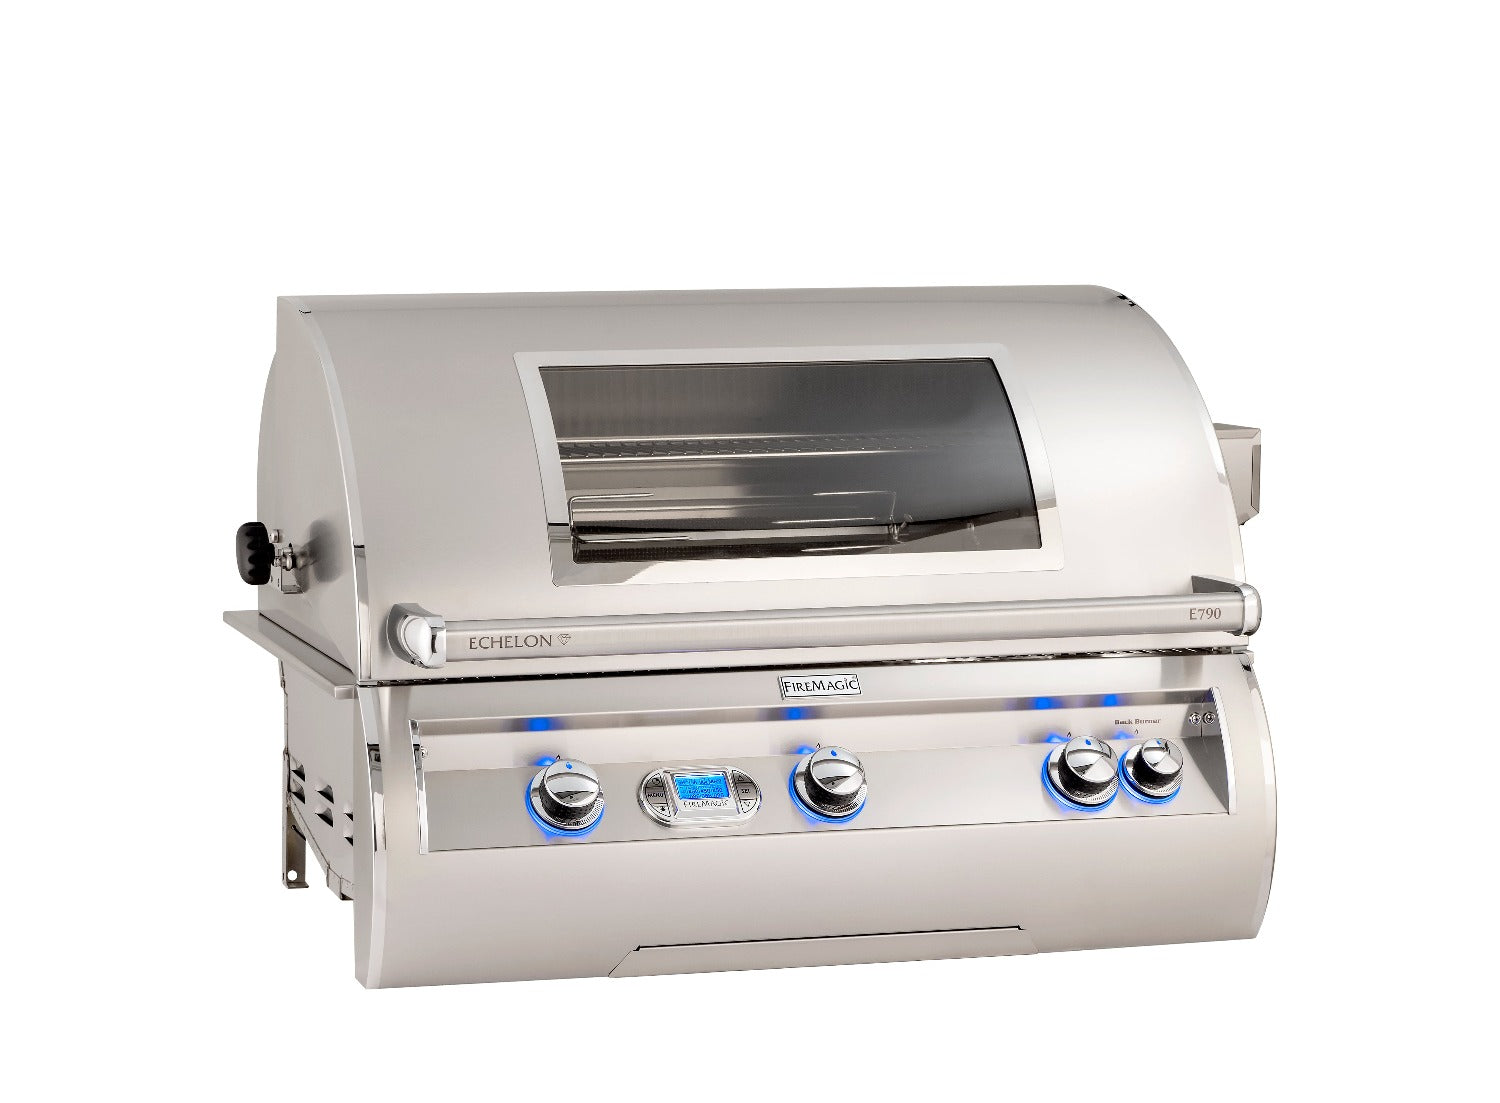 Fire Magic Echelon Diamond E790i, 36 inch Built-In Gas Grills with Digital Thermometer and Magic Window, Natural Gas Outdoor Grills Natural Gas / No 12033072